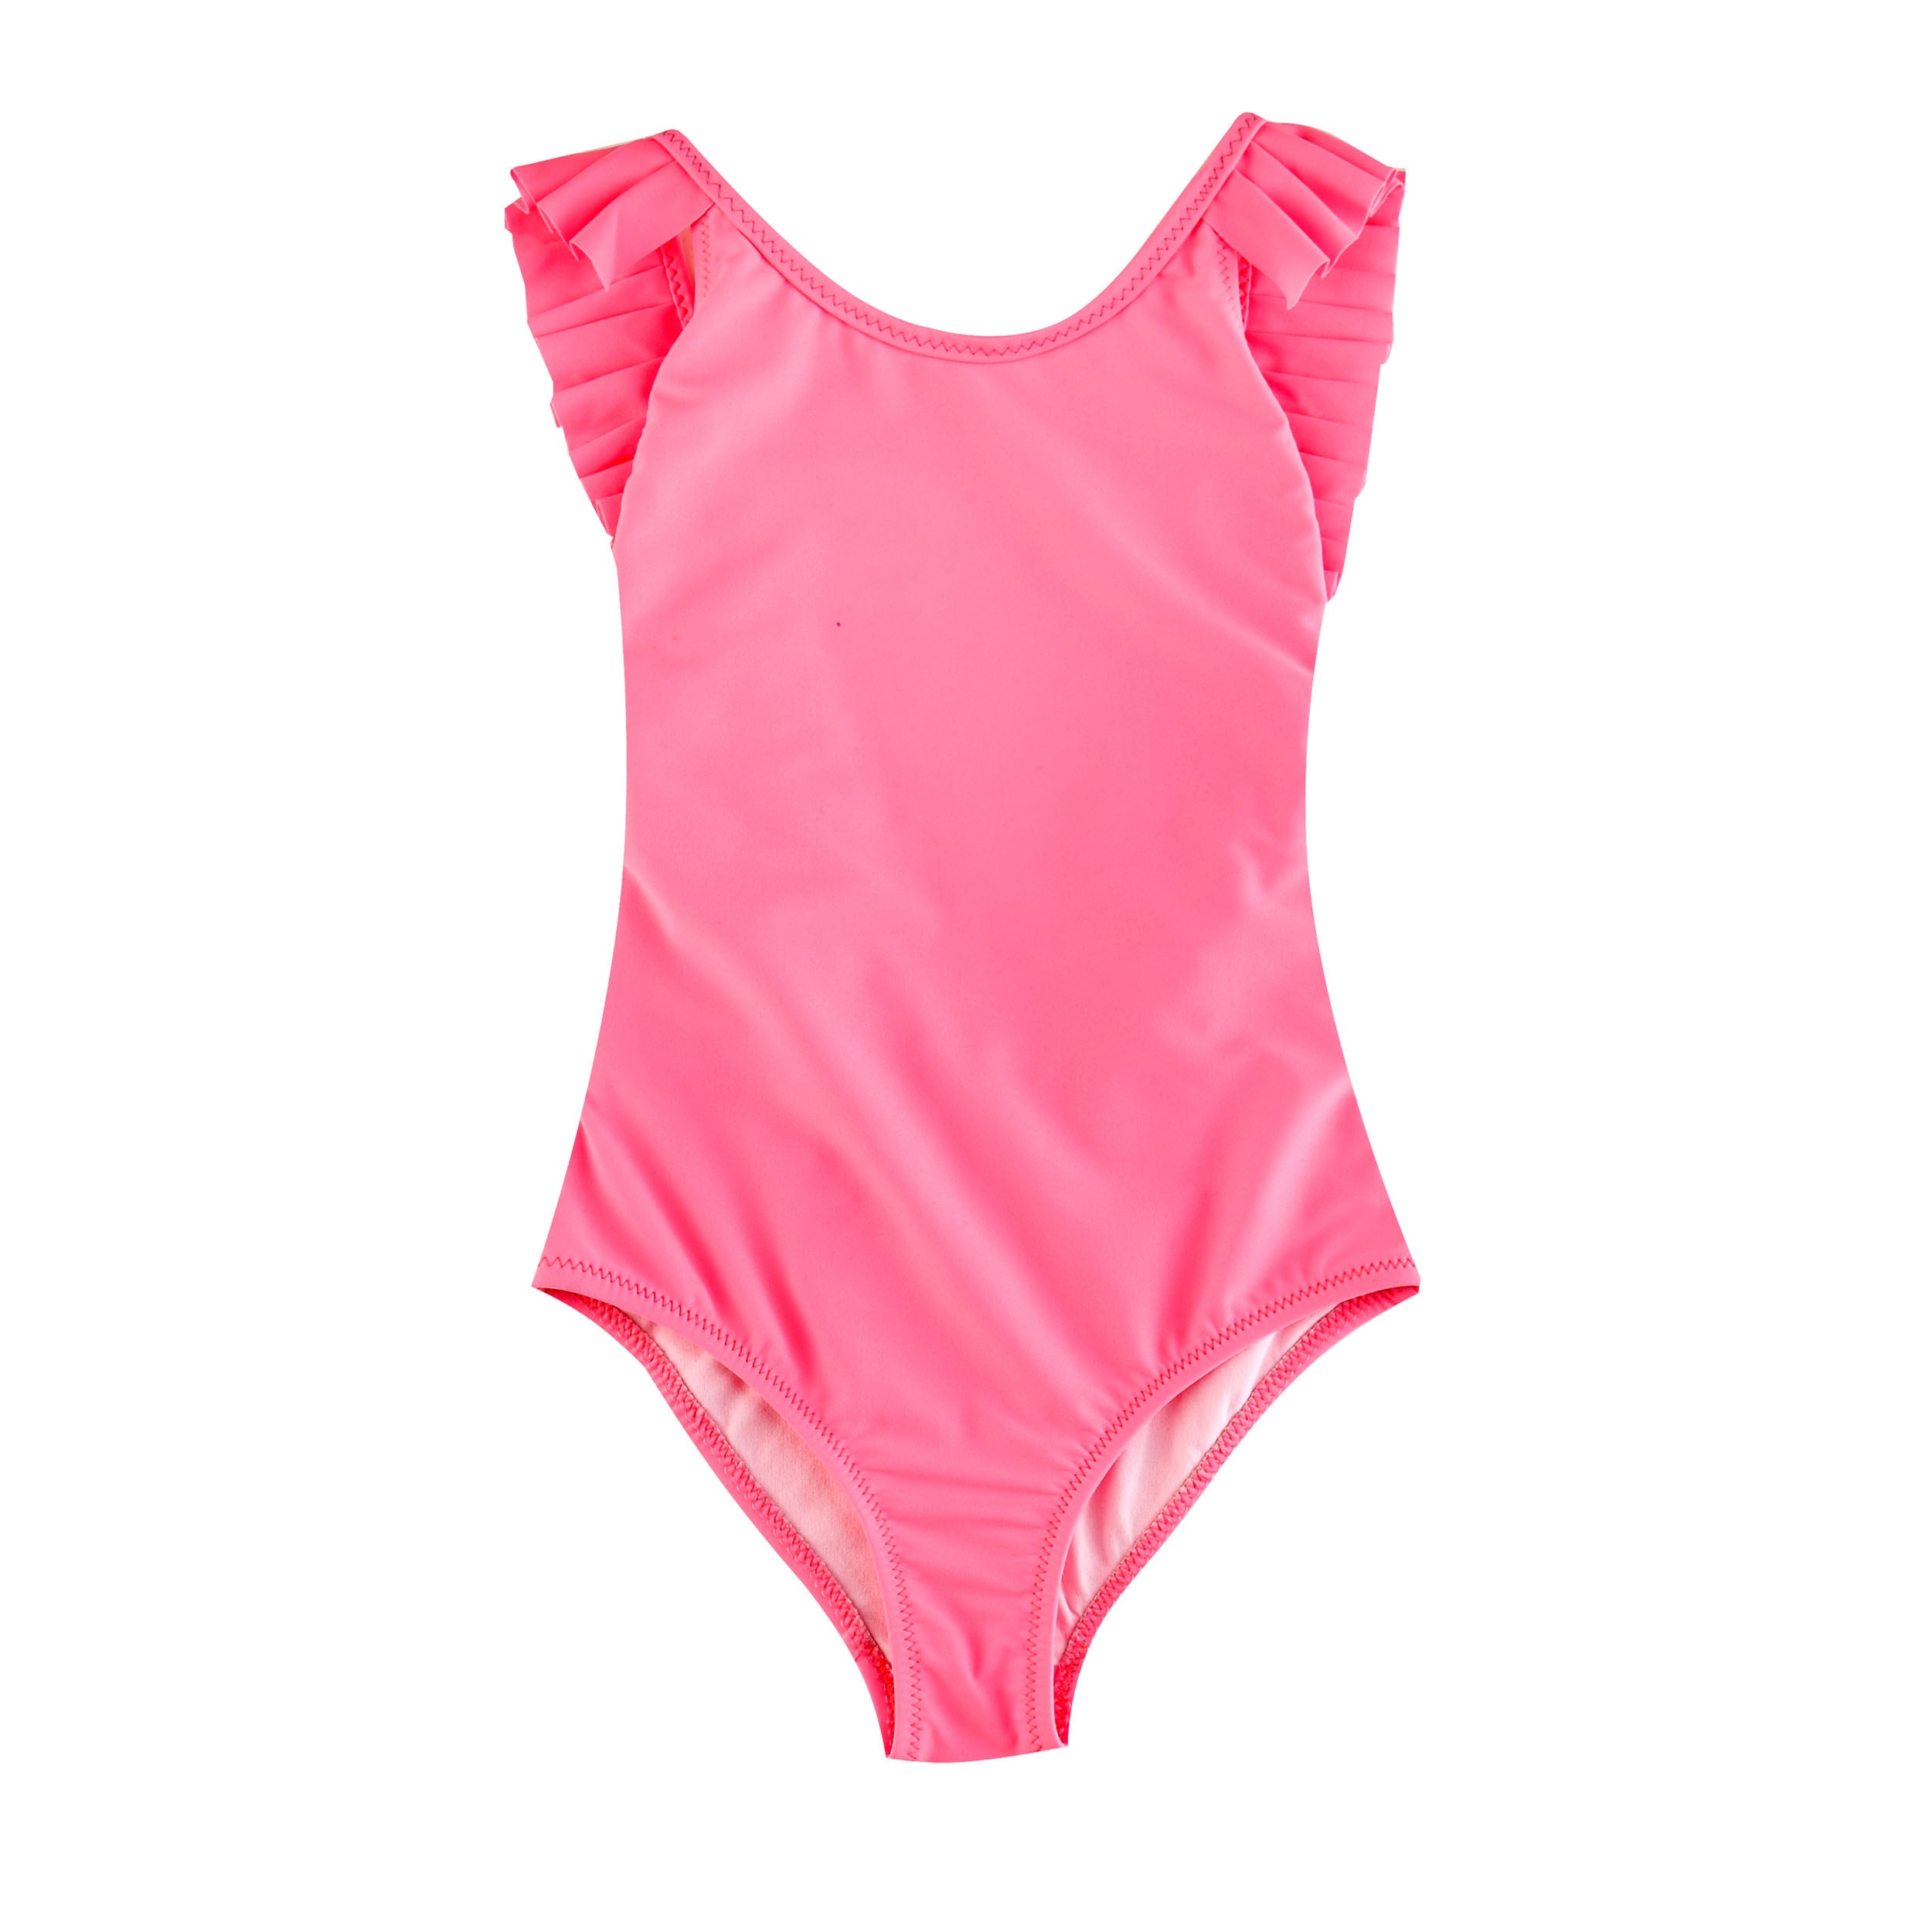 GIRL'S ONE PIECE PLEATED NEON PINK